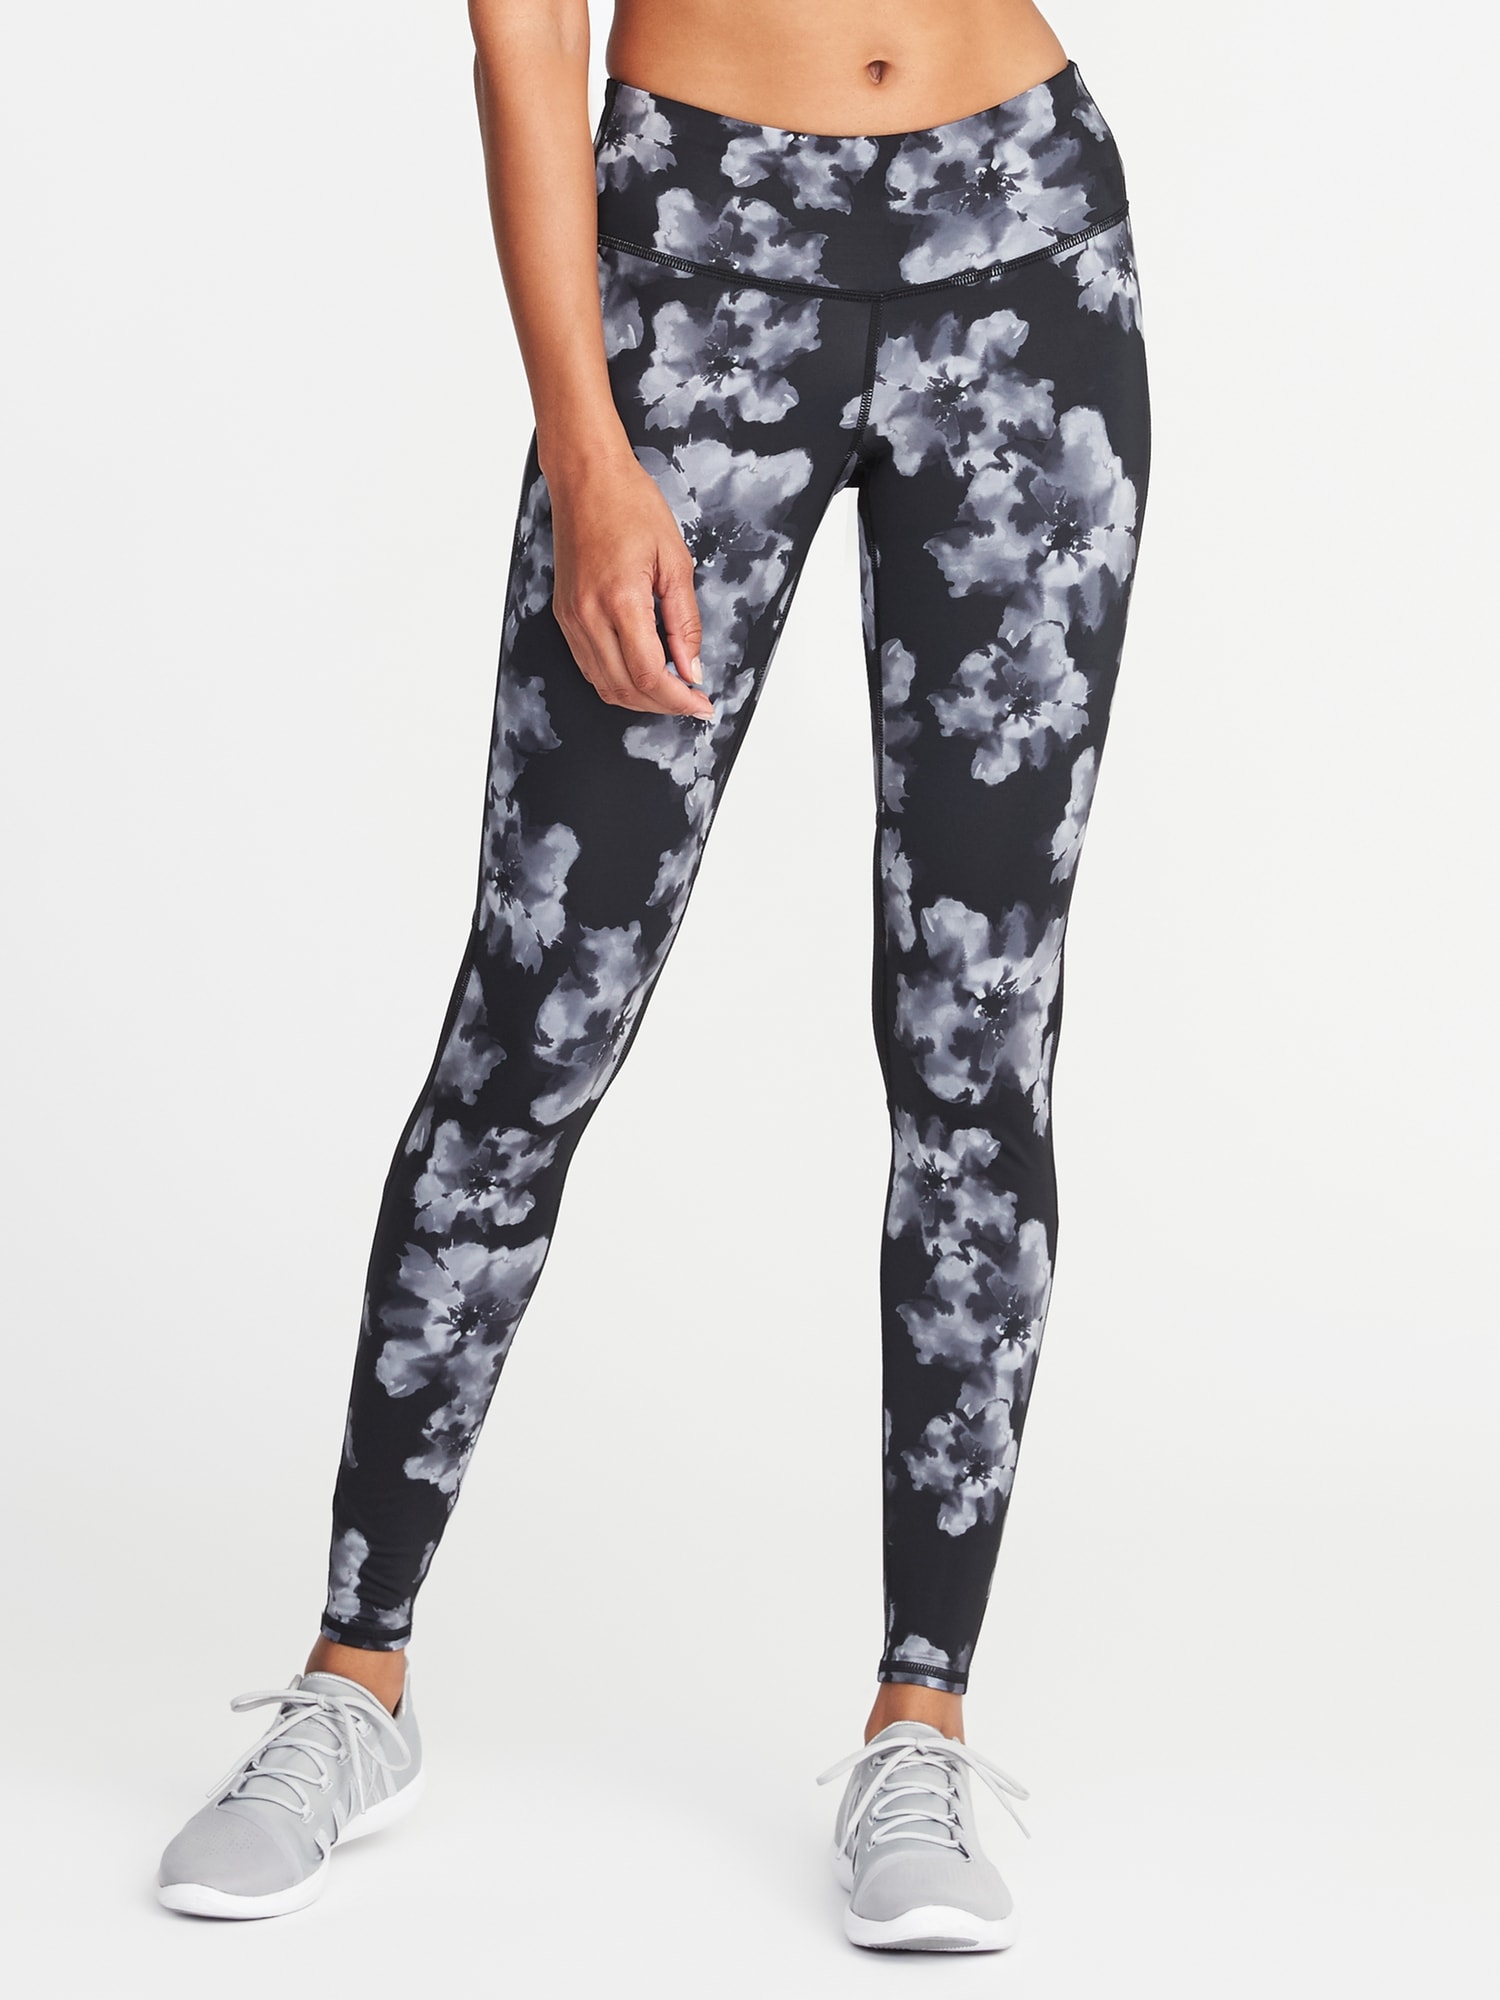 Sonoma Mid Rise Legging. Grey/Floral Print. Size: S. New with Tags